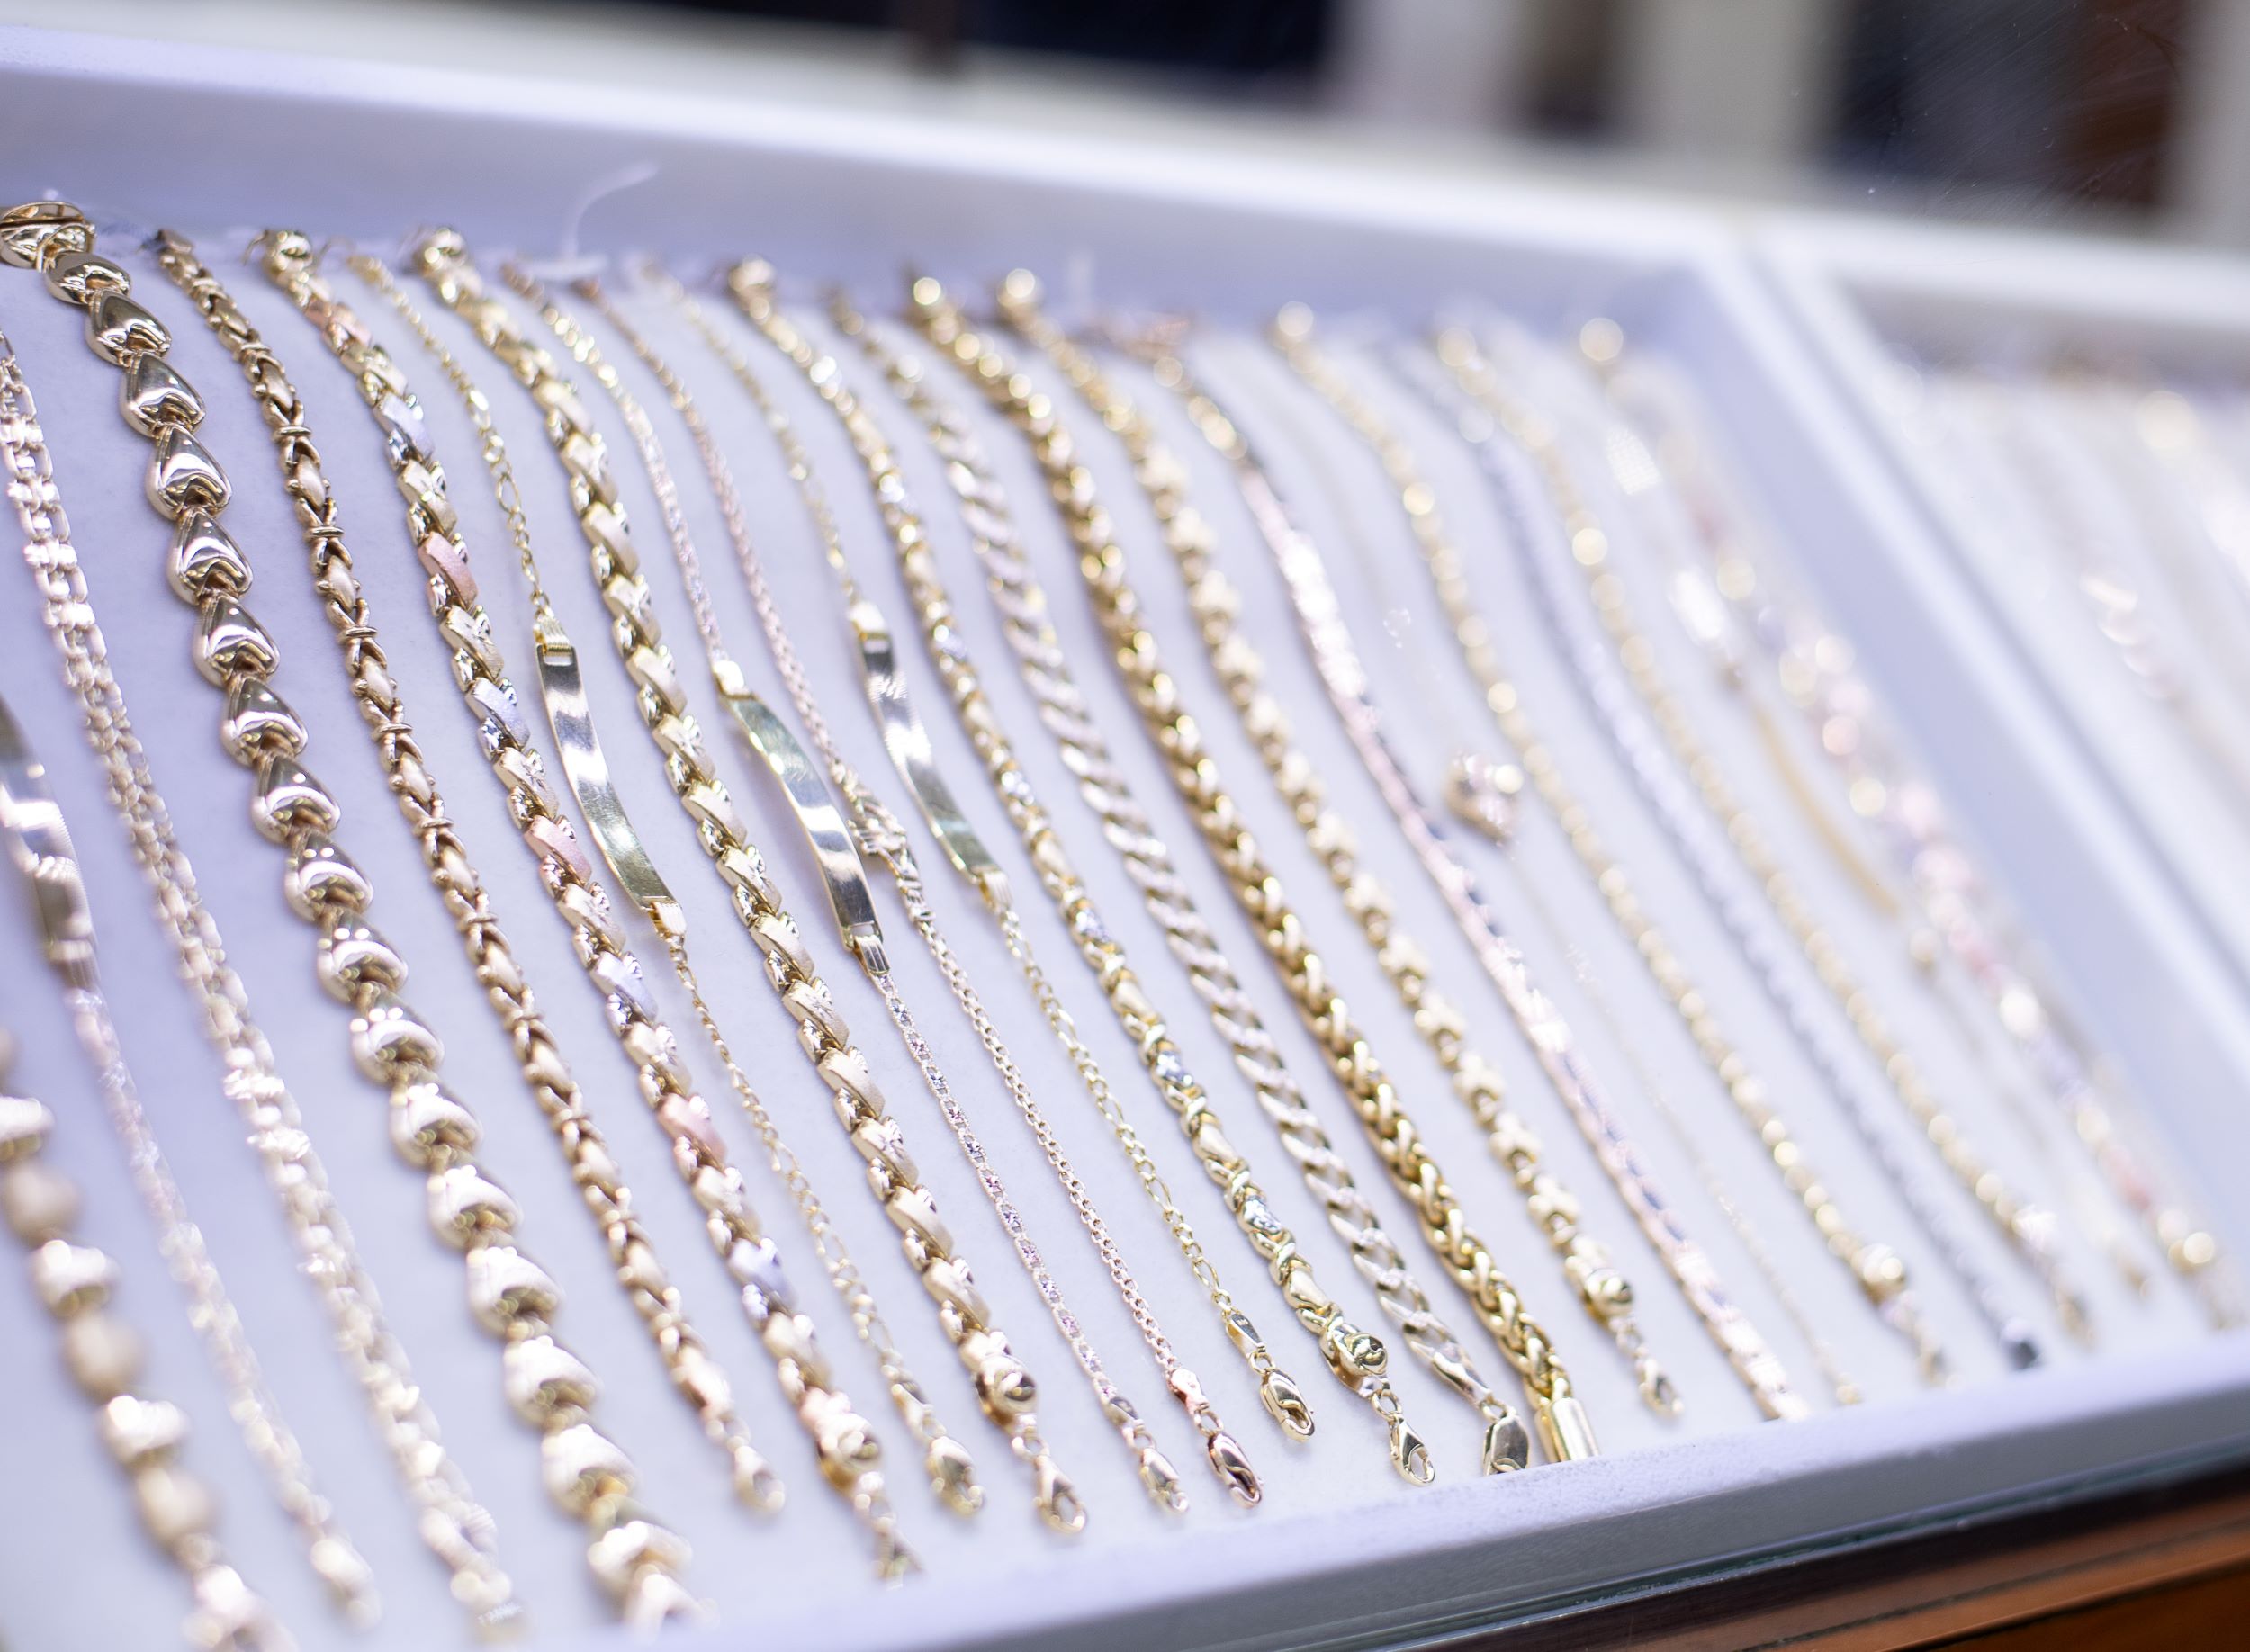 An array of gold and silver necklaces displayed neatly in a glass jewelry case, with varying designs and sizes, creating a shimmering effect.